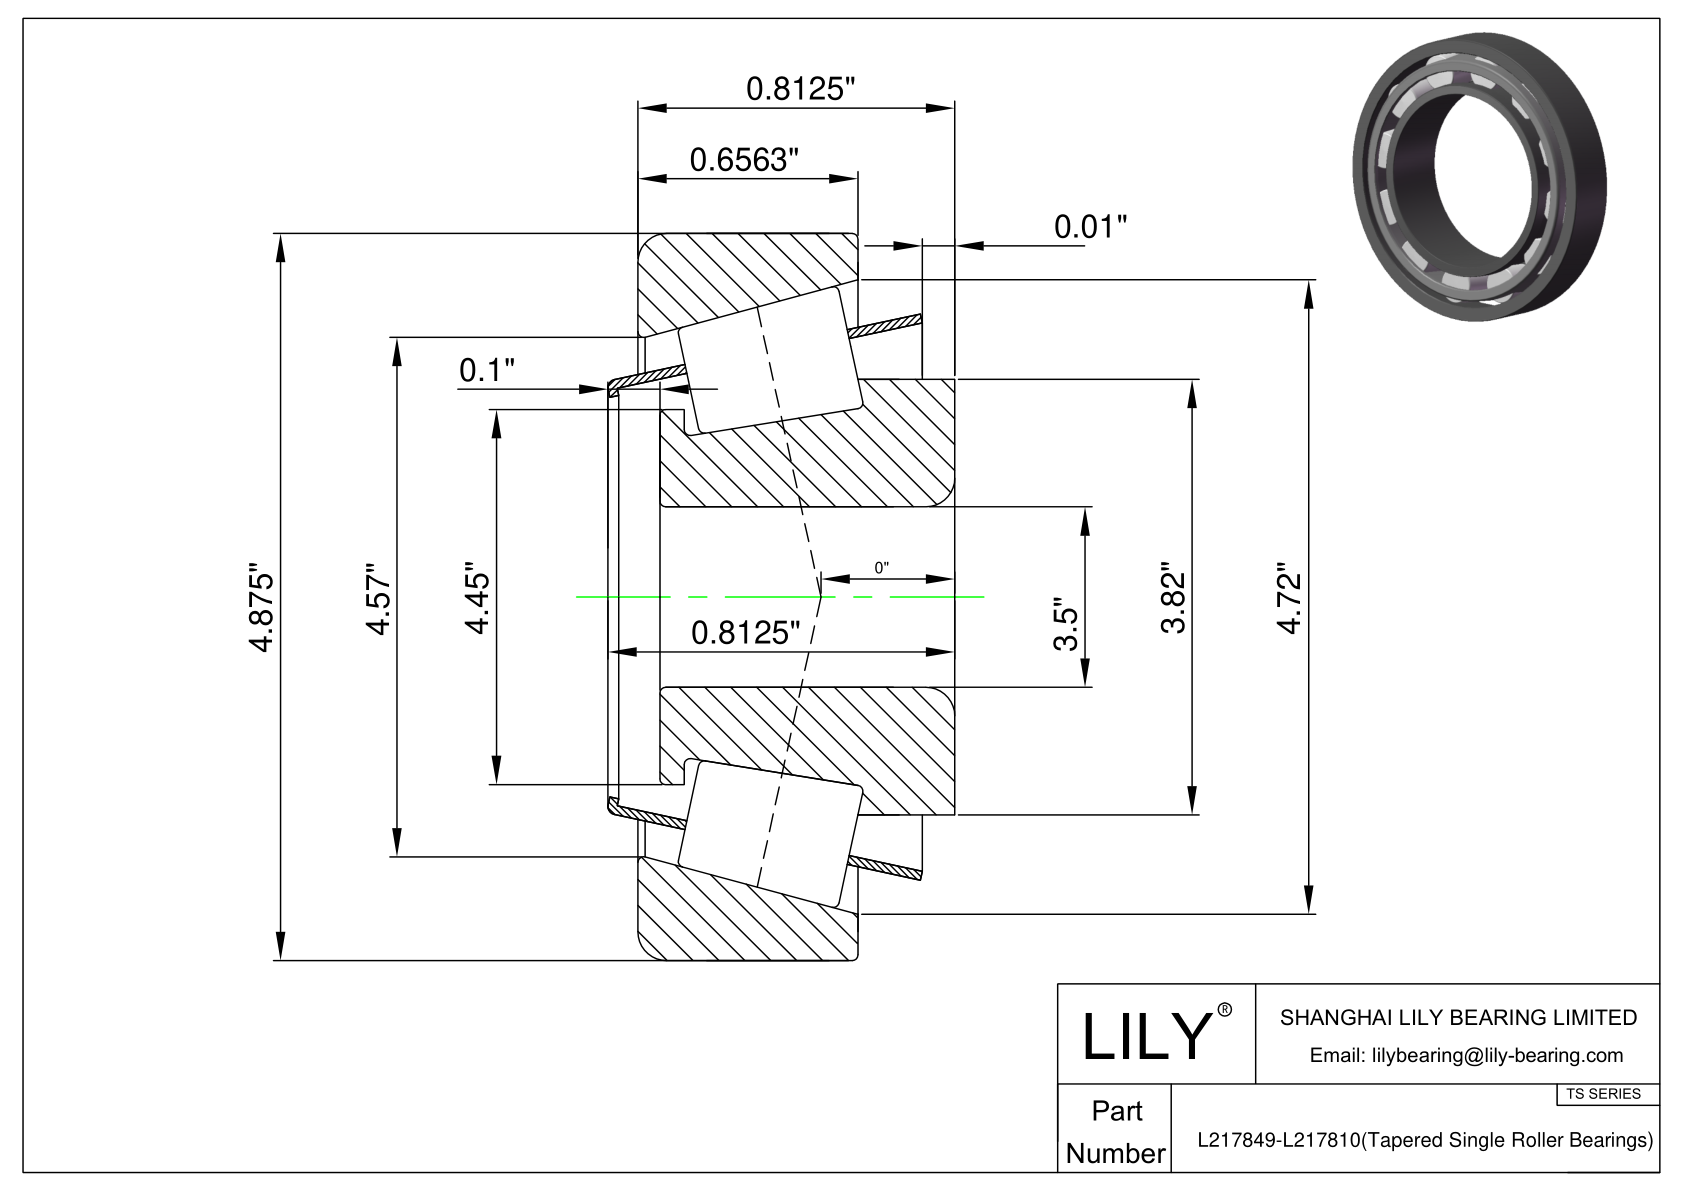 L217849-L217810 TS (Tapered Single Roller Bearings) (Imperial) cad drawing